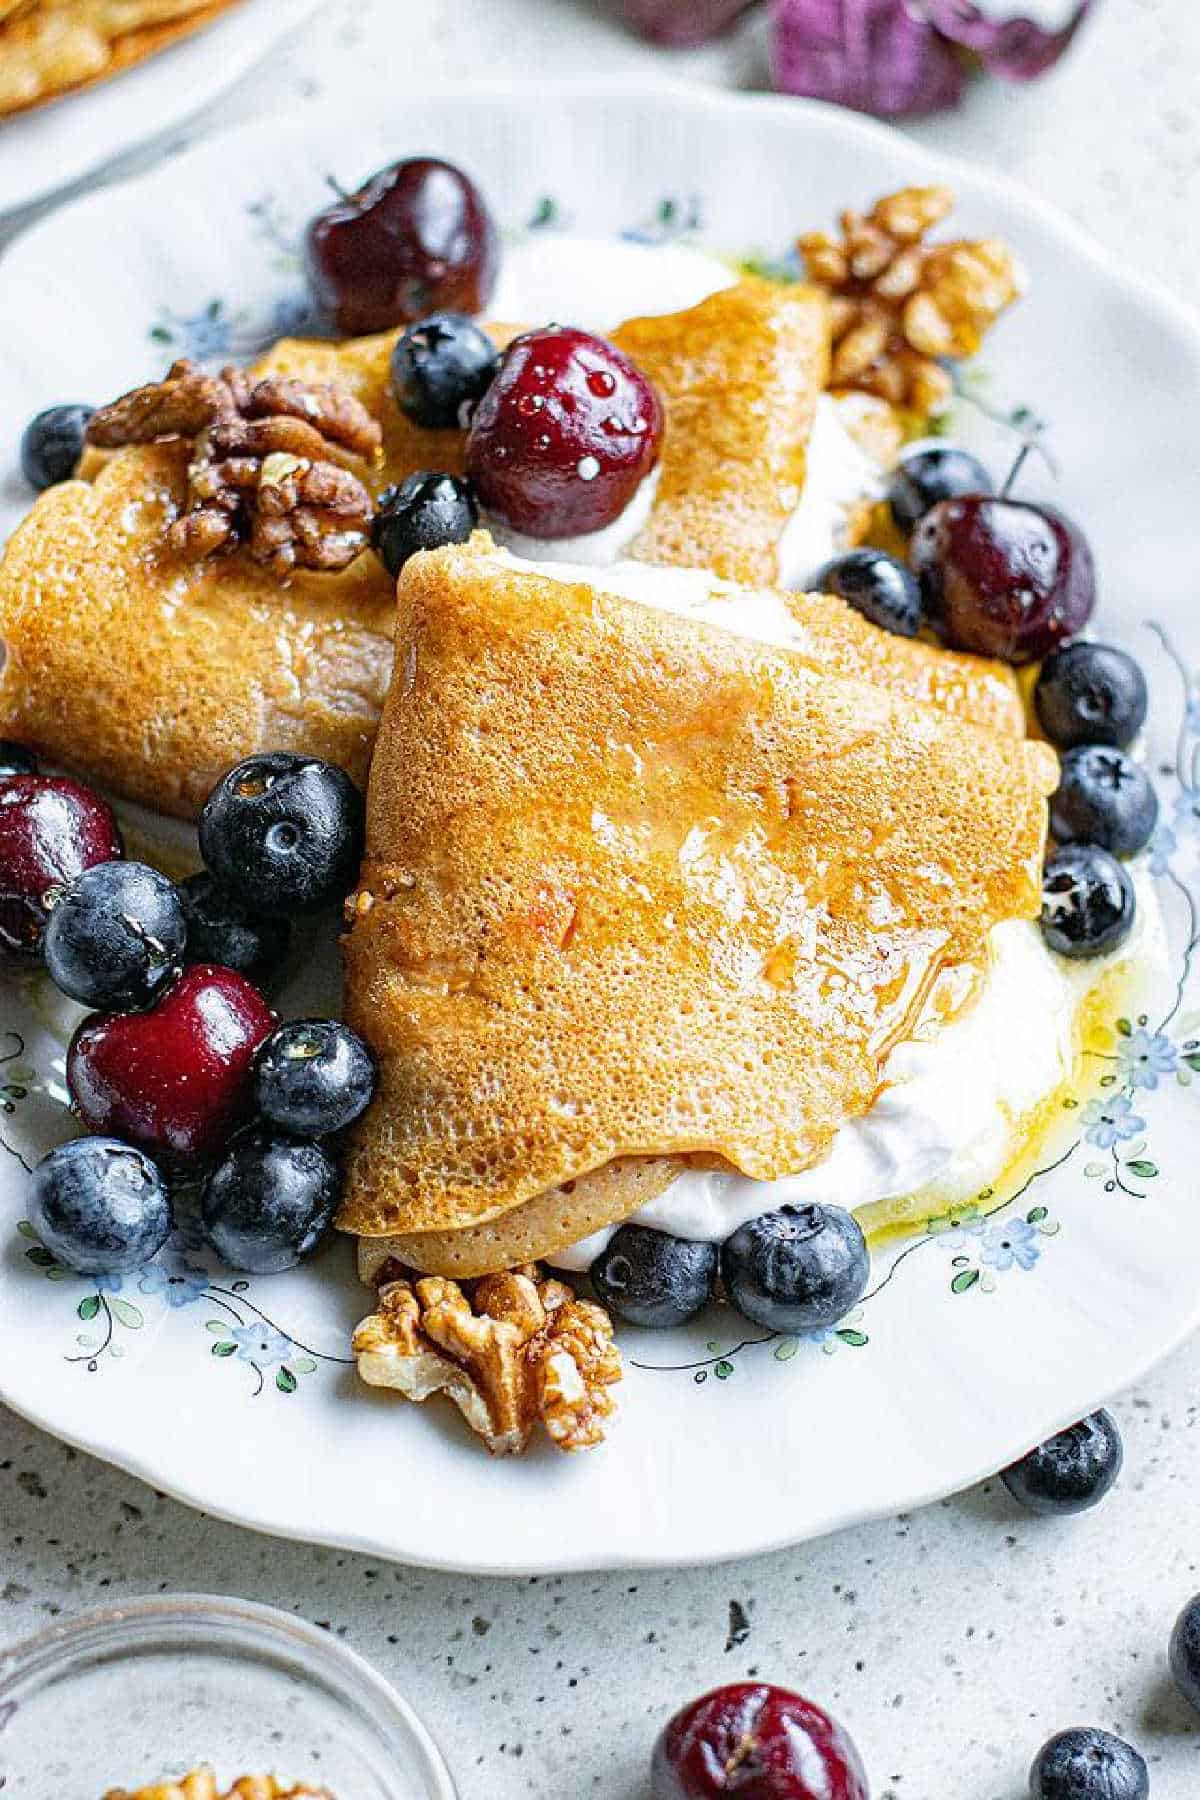 Carrot Cake Vegetable Crepes with Berries featured image